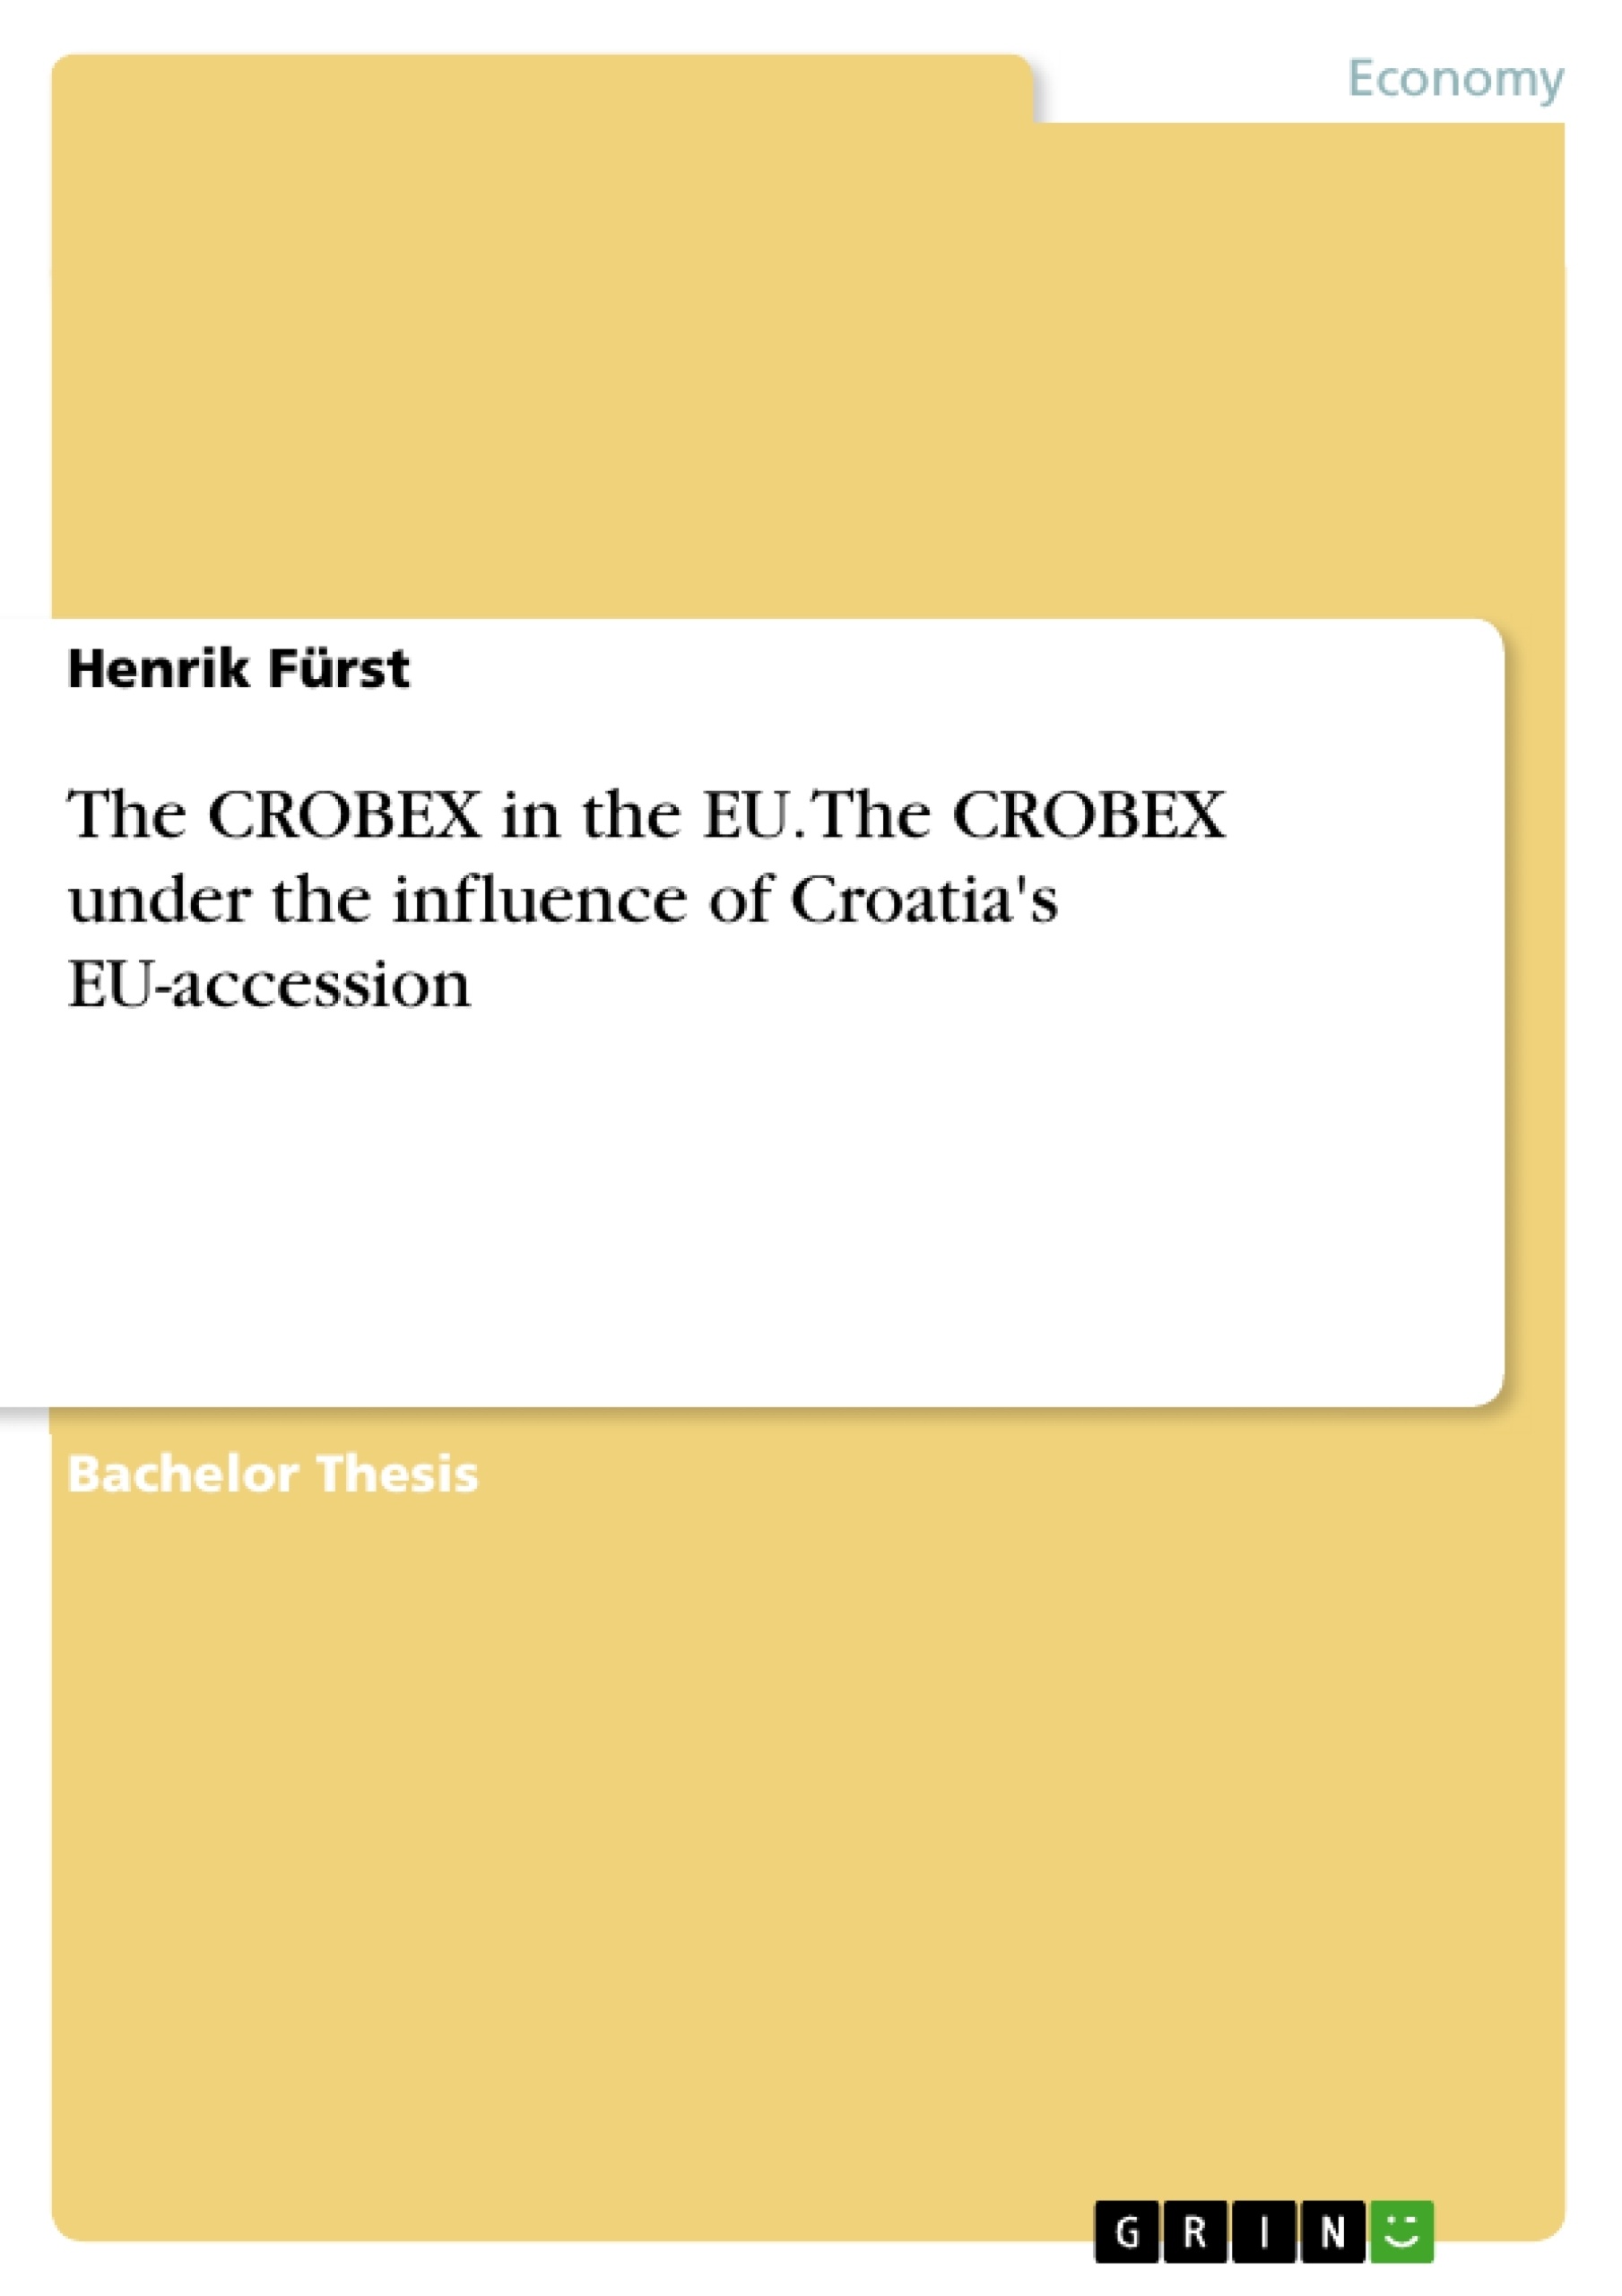 Title: The CROBEX in the EU. The CROBEX under the influence of Croatia's EU-accession